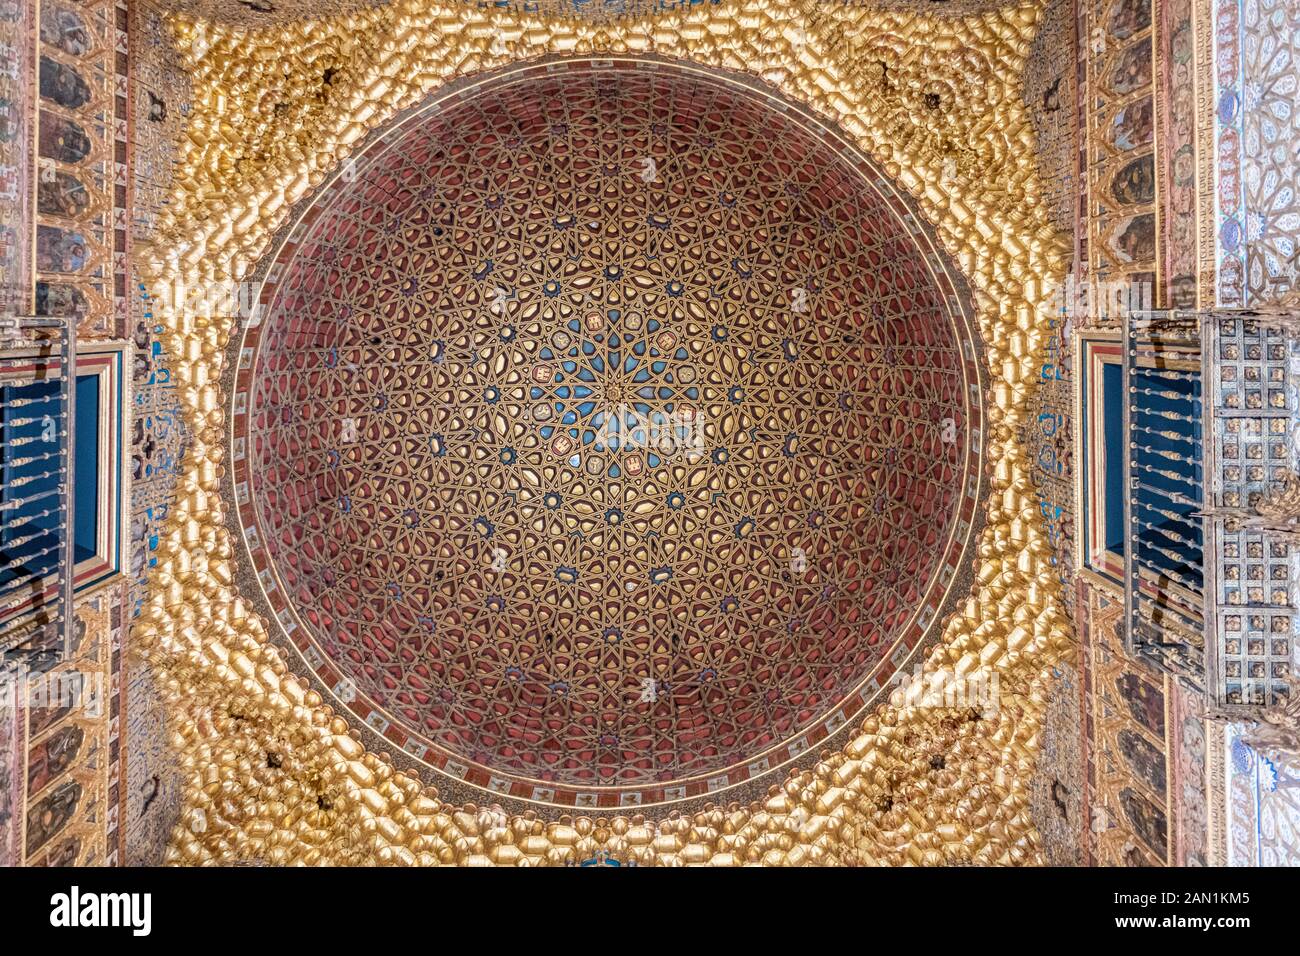 The stunning carved and gilded interlaced wooden dome in the Salón de los Embajadores of the Alcazar Palace's Palacio Del Rey Don Pedro. Stock Photo